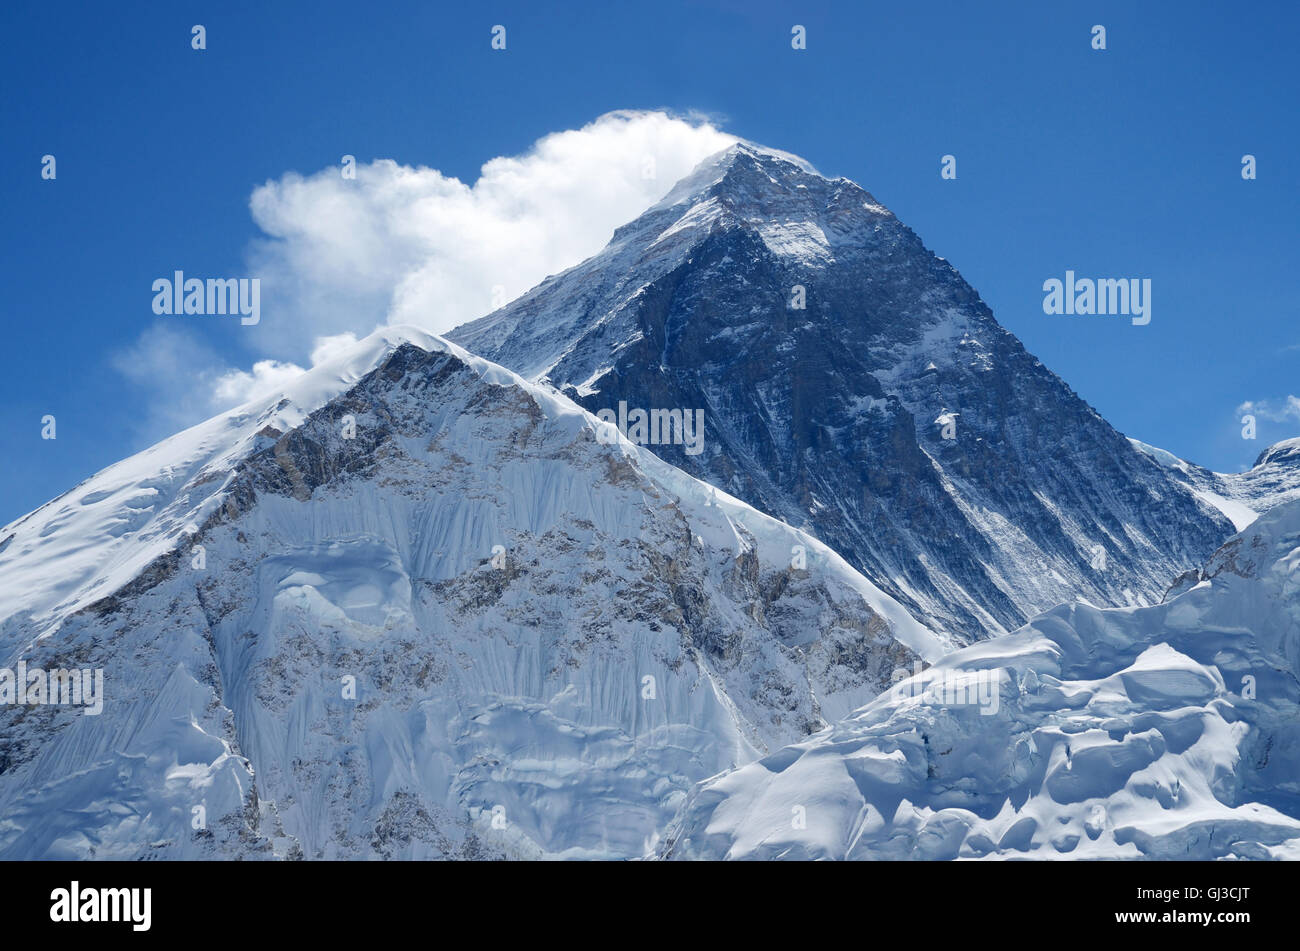 Summit of mount Everest or Sagarmatha - highest mountain in the world, view from Kala Patthar on sunny day,Nepal,Himalayas Stock Photo